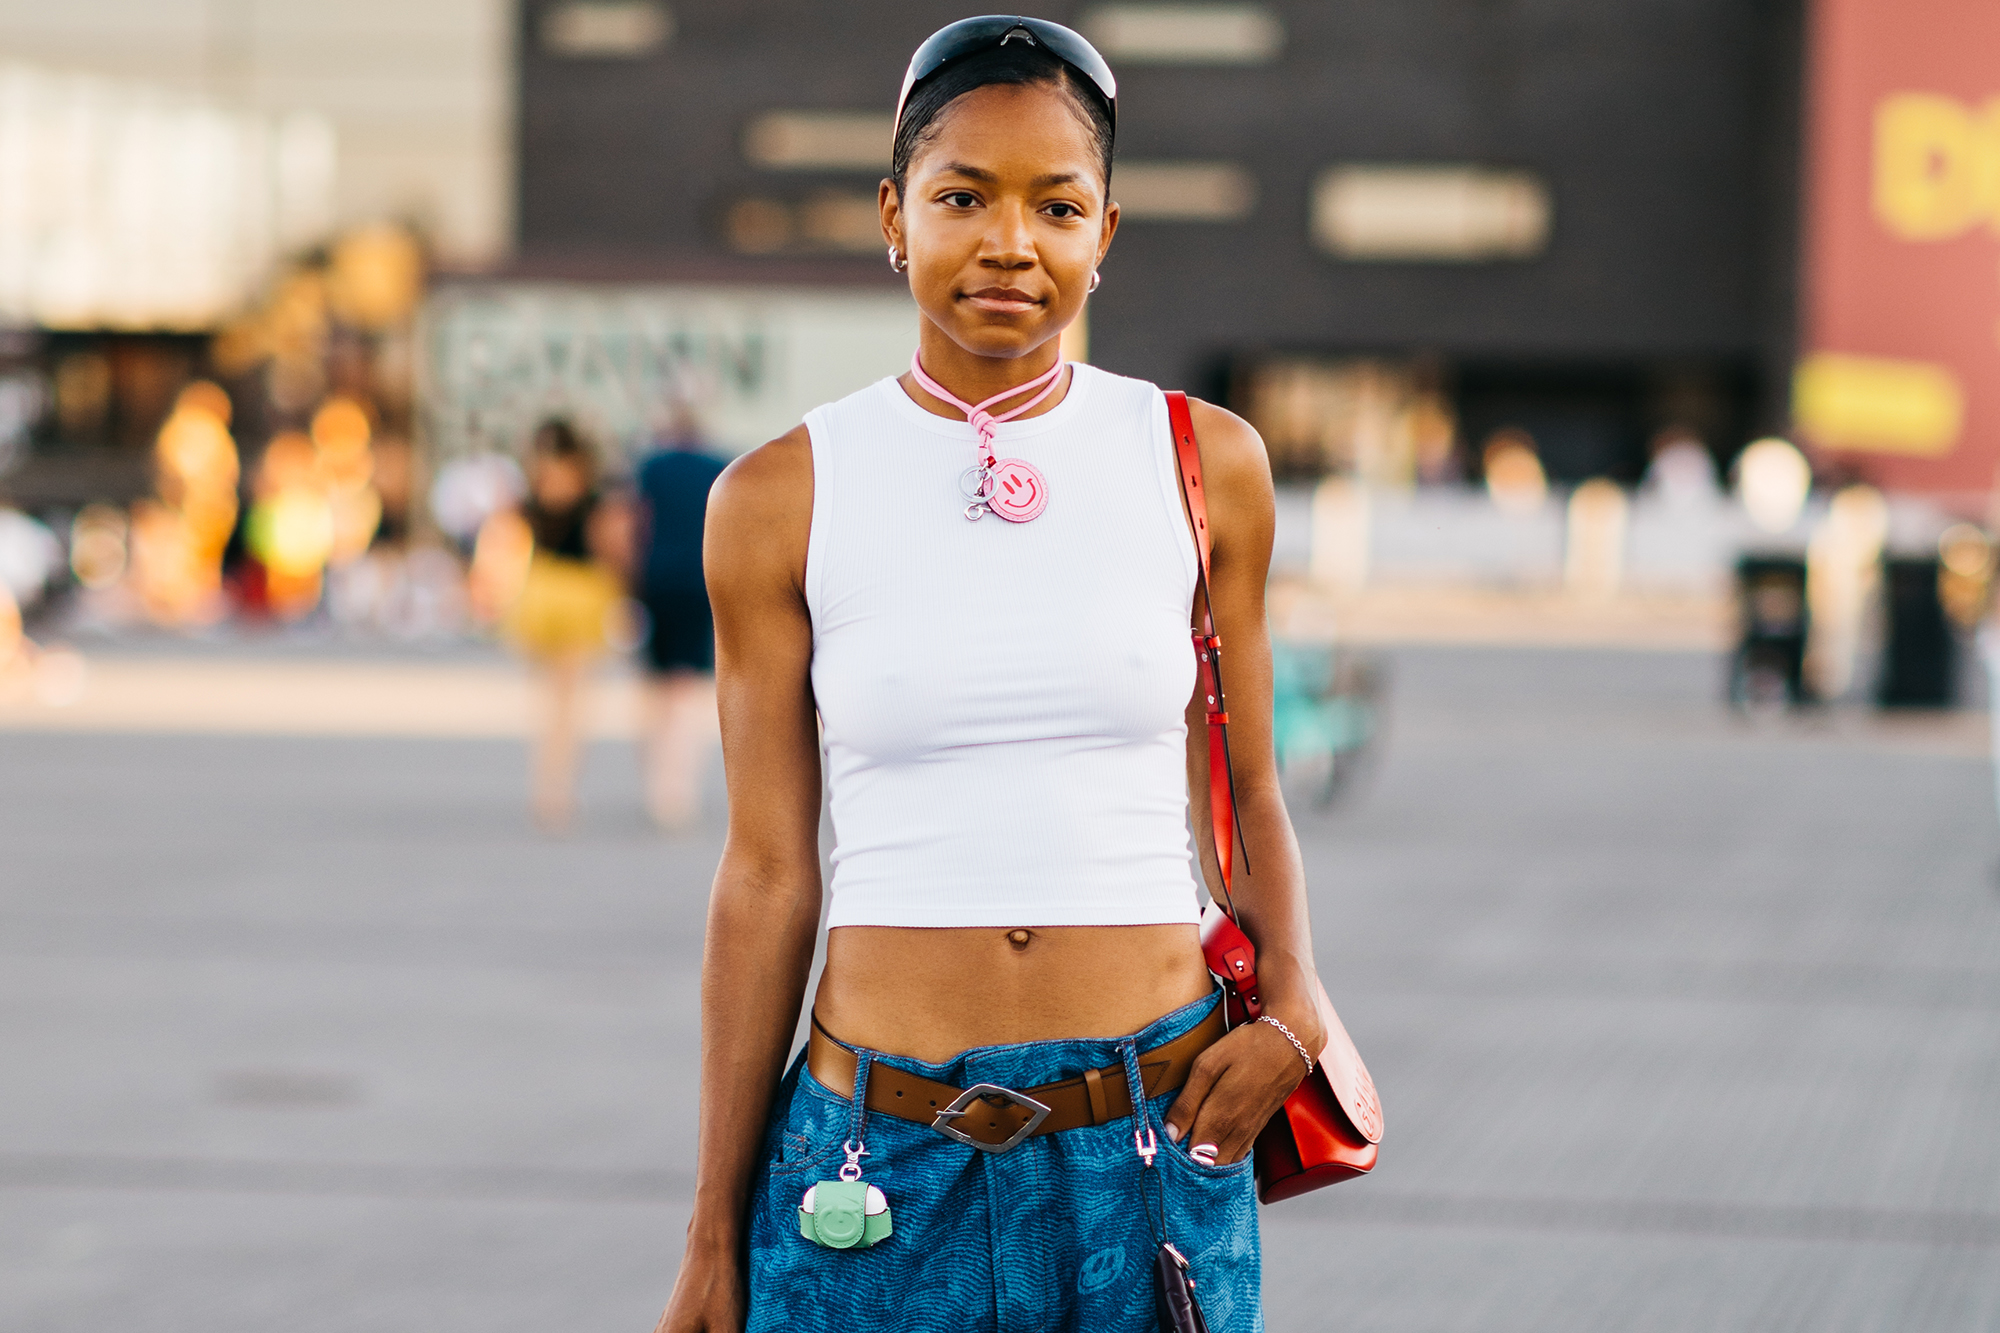 A Definitive Style Guide To The Best White Tank Tops